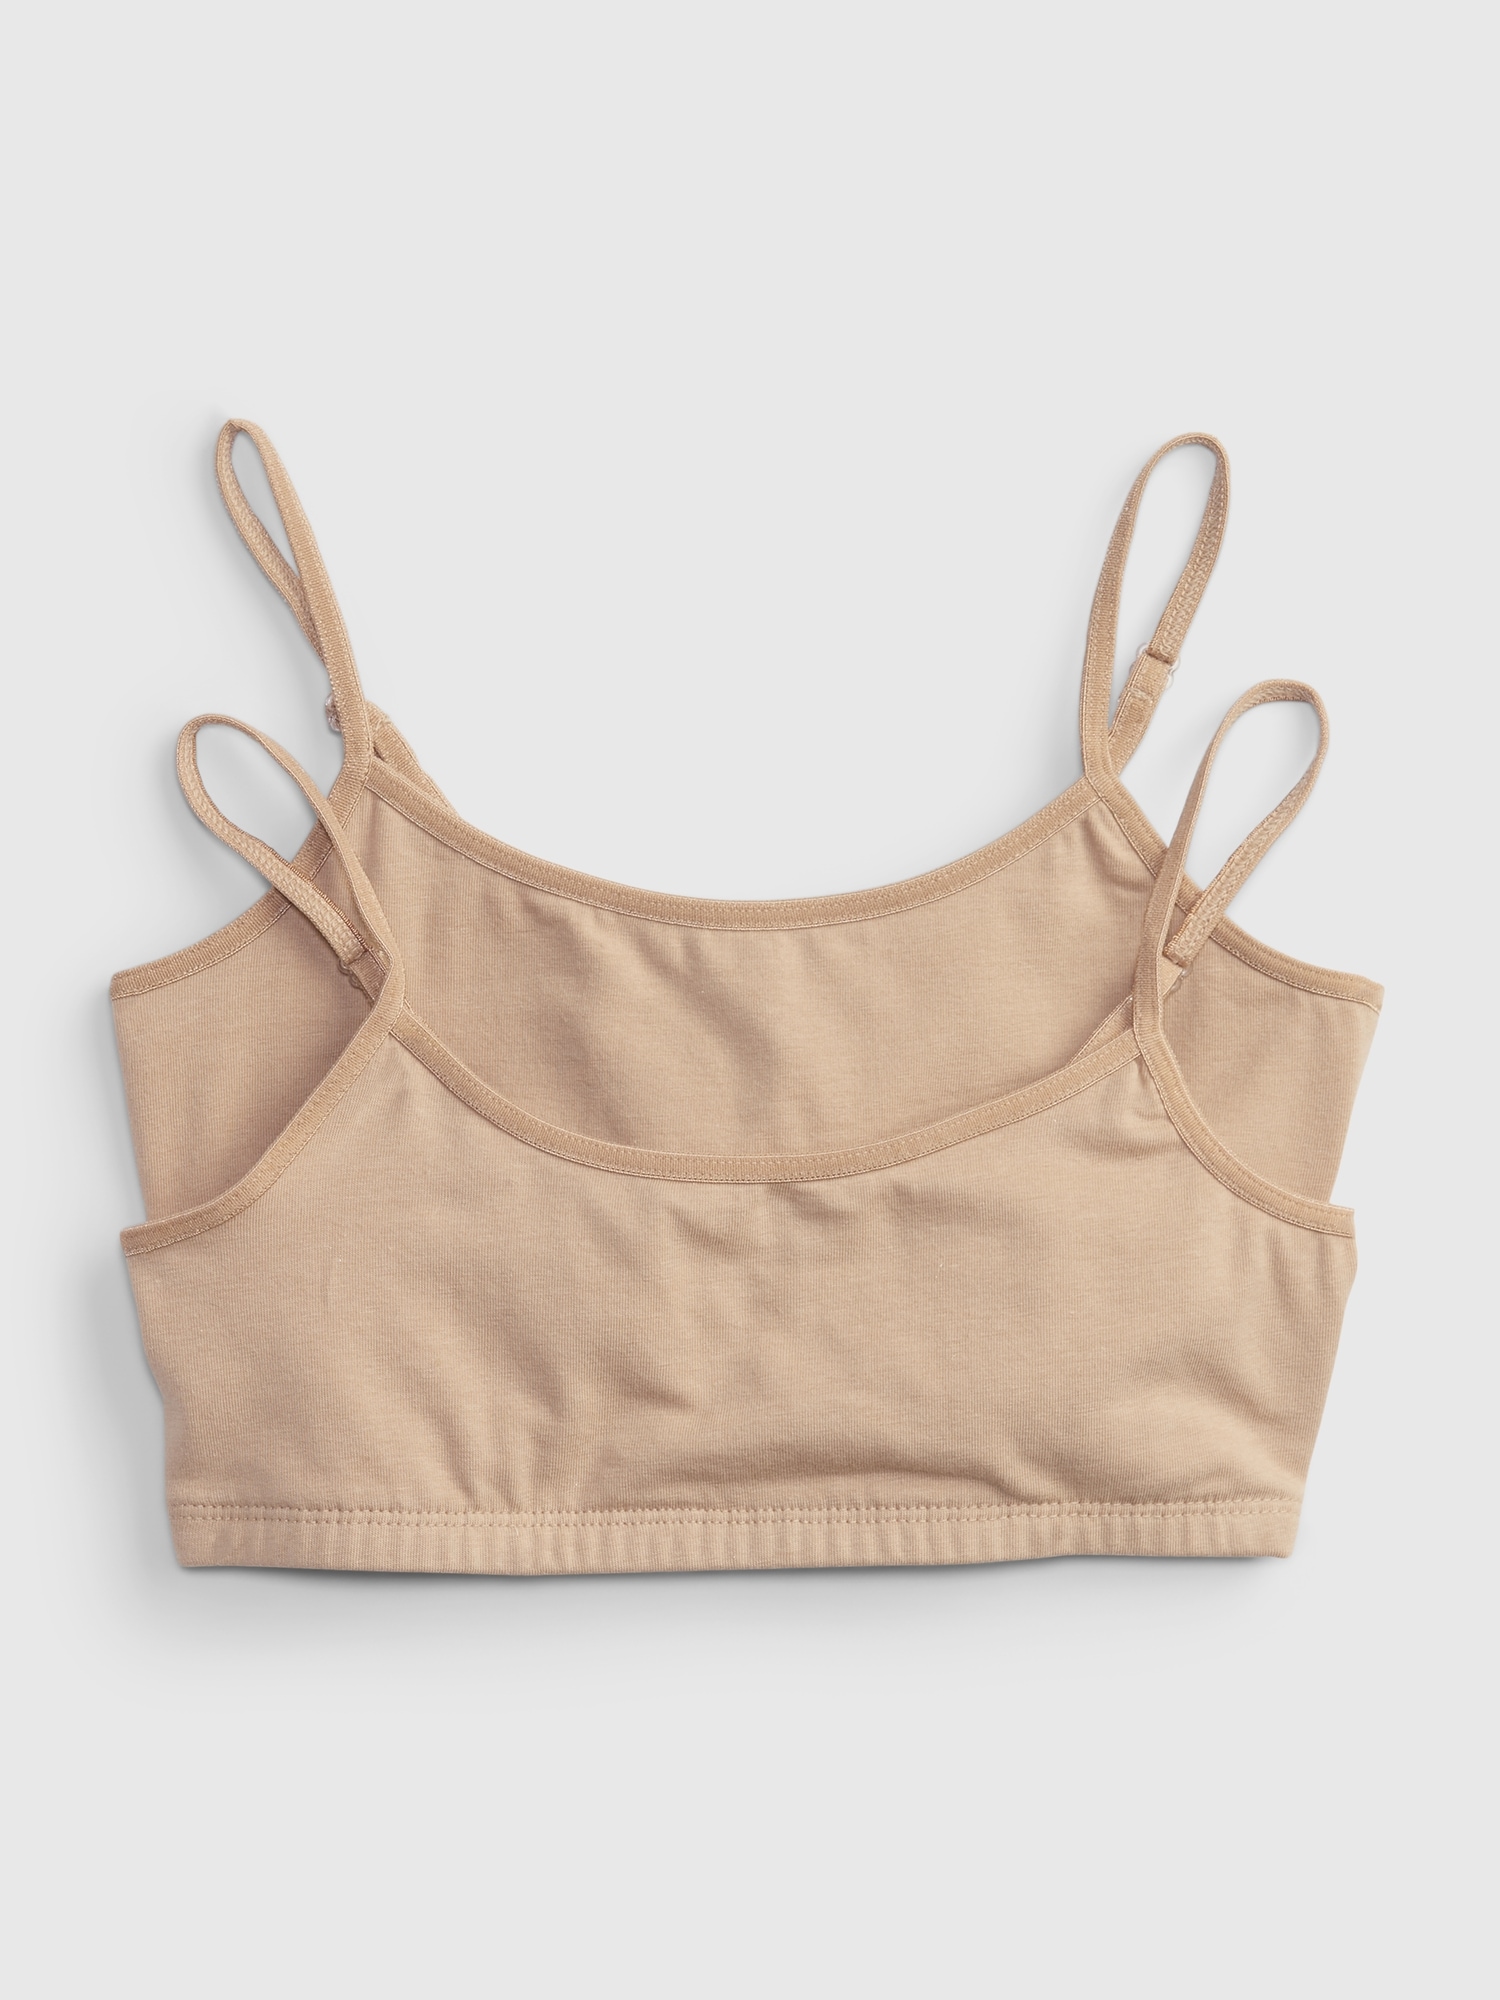 Joey Cotton Spandex Bra for More Developed and Growing Girls by